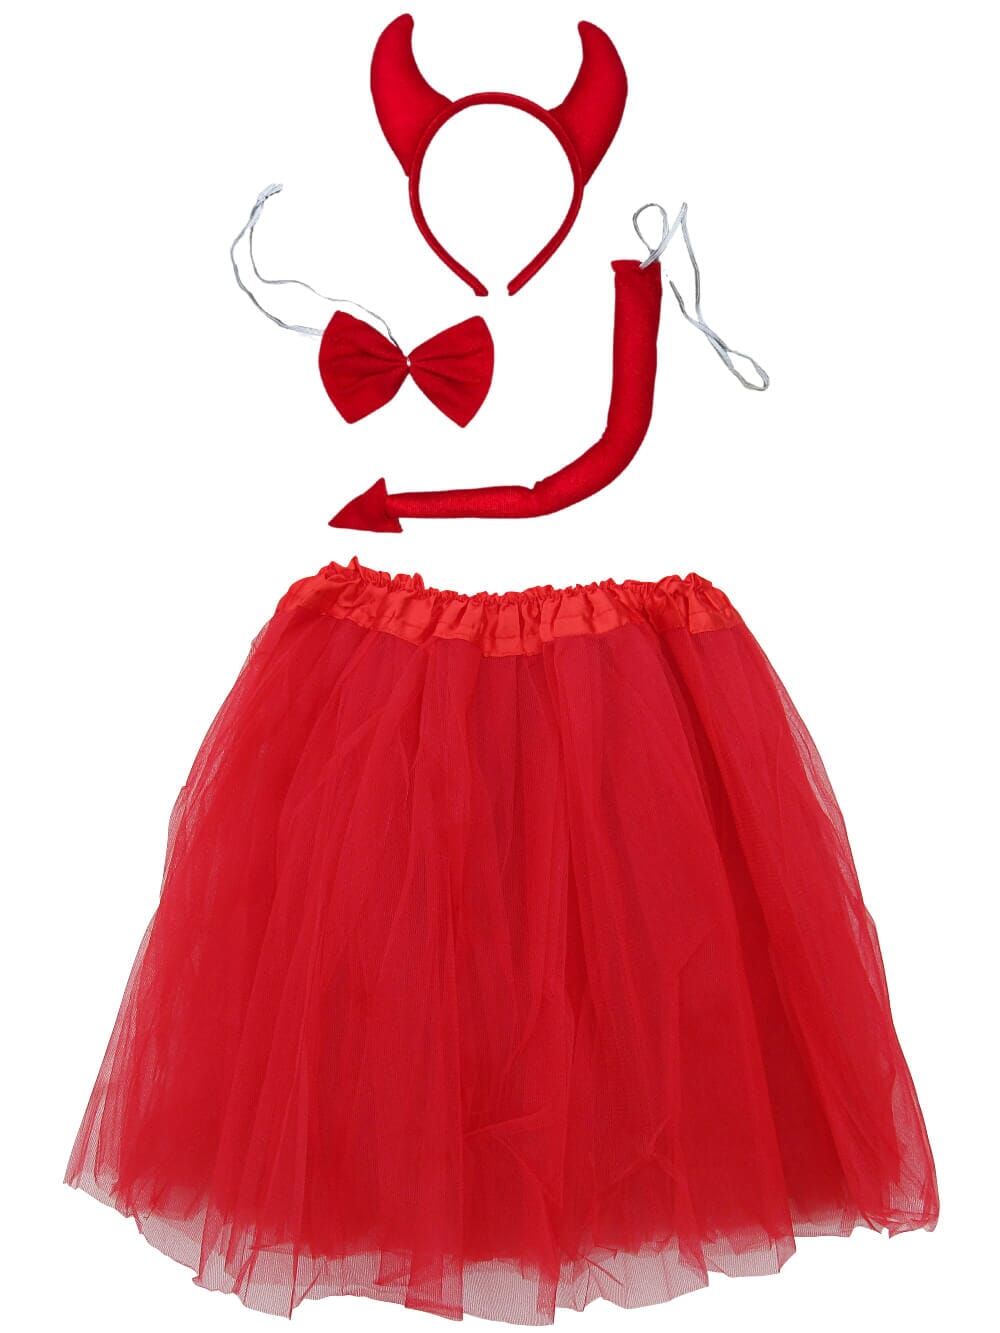 Adult Red Devil Costume - Red Tutu Skirt, Tail, Bow Tie, & Headband Horns Set for Adult or Plus Size - Sydney So Sweet